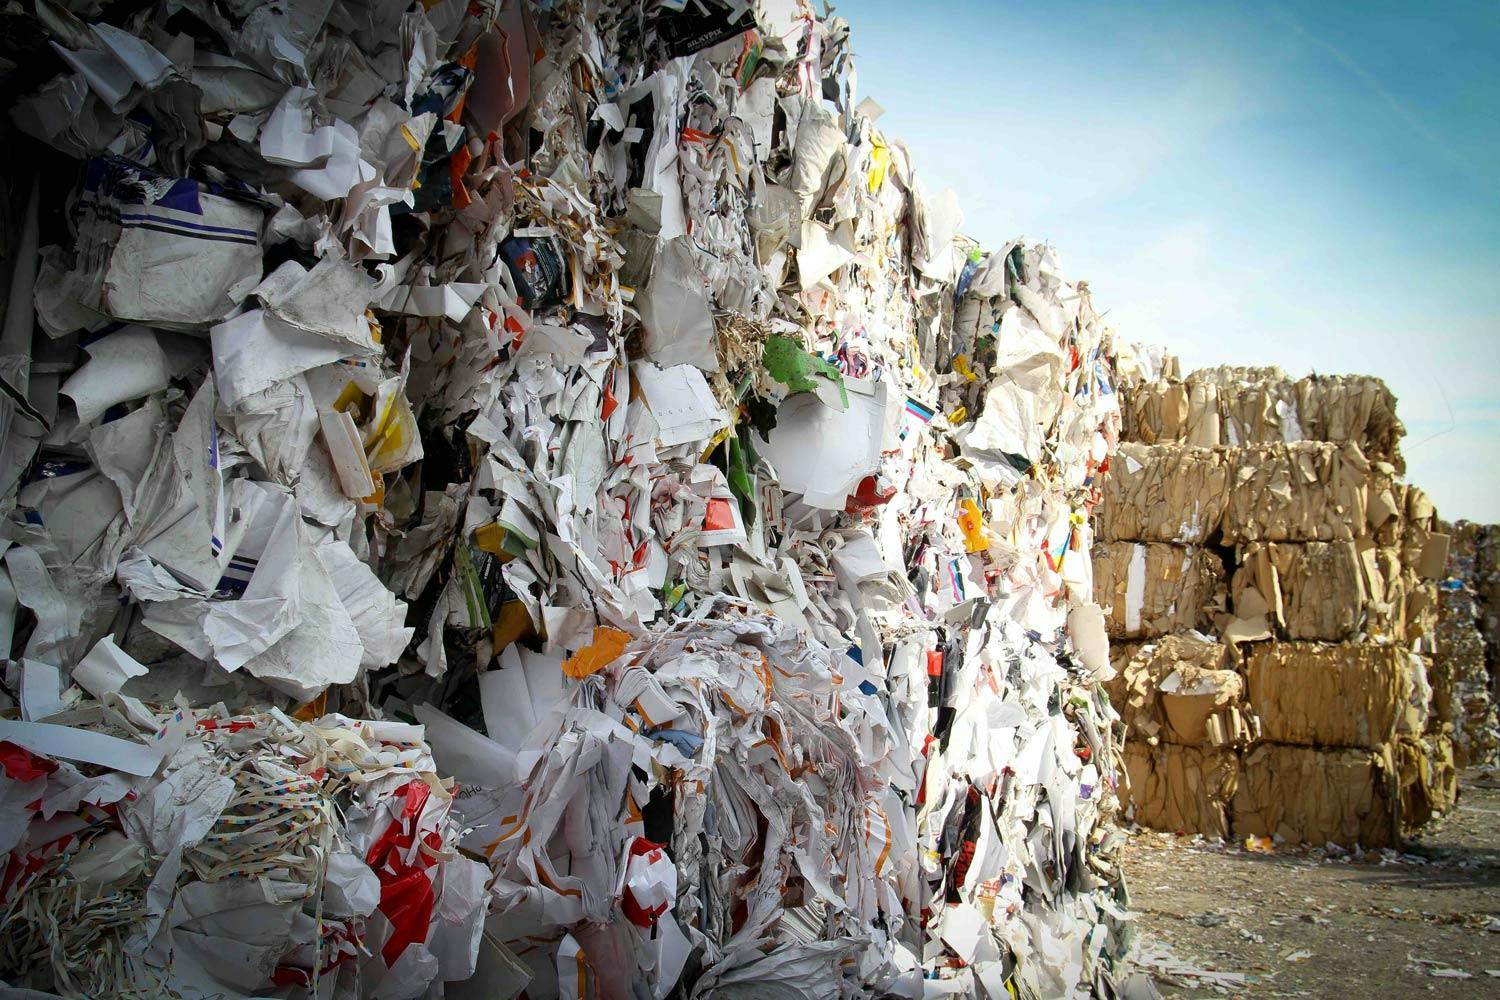 Stacks of recycling materials, including paper and cardboard, are bundled together in a recycling facility.